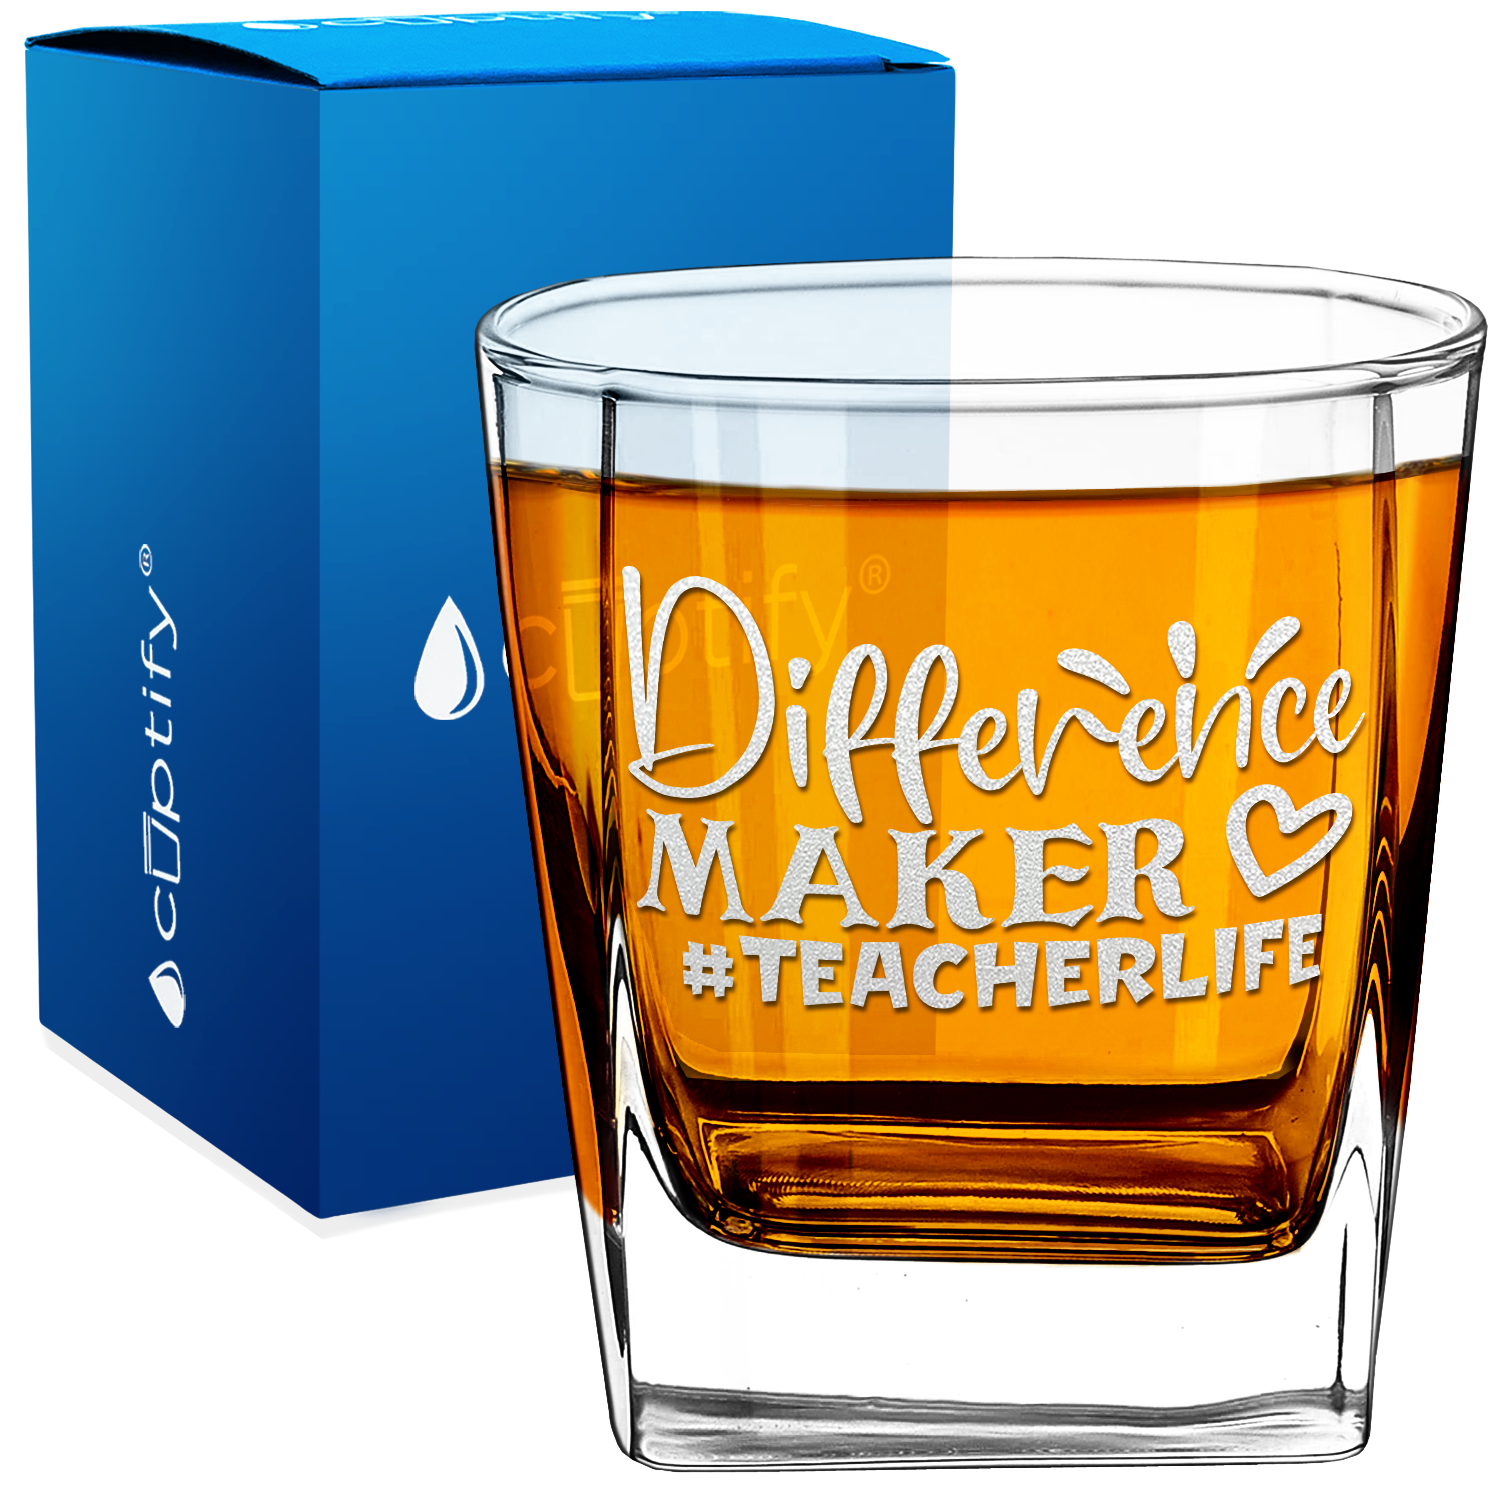 Difference Maker #Teacherlife on 12oz Double Old Fashioned Glass